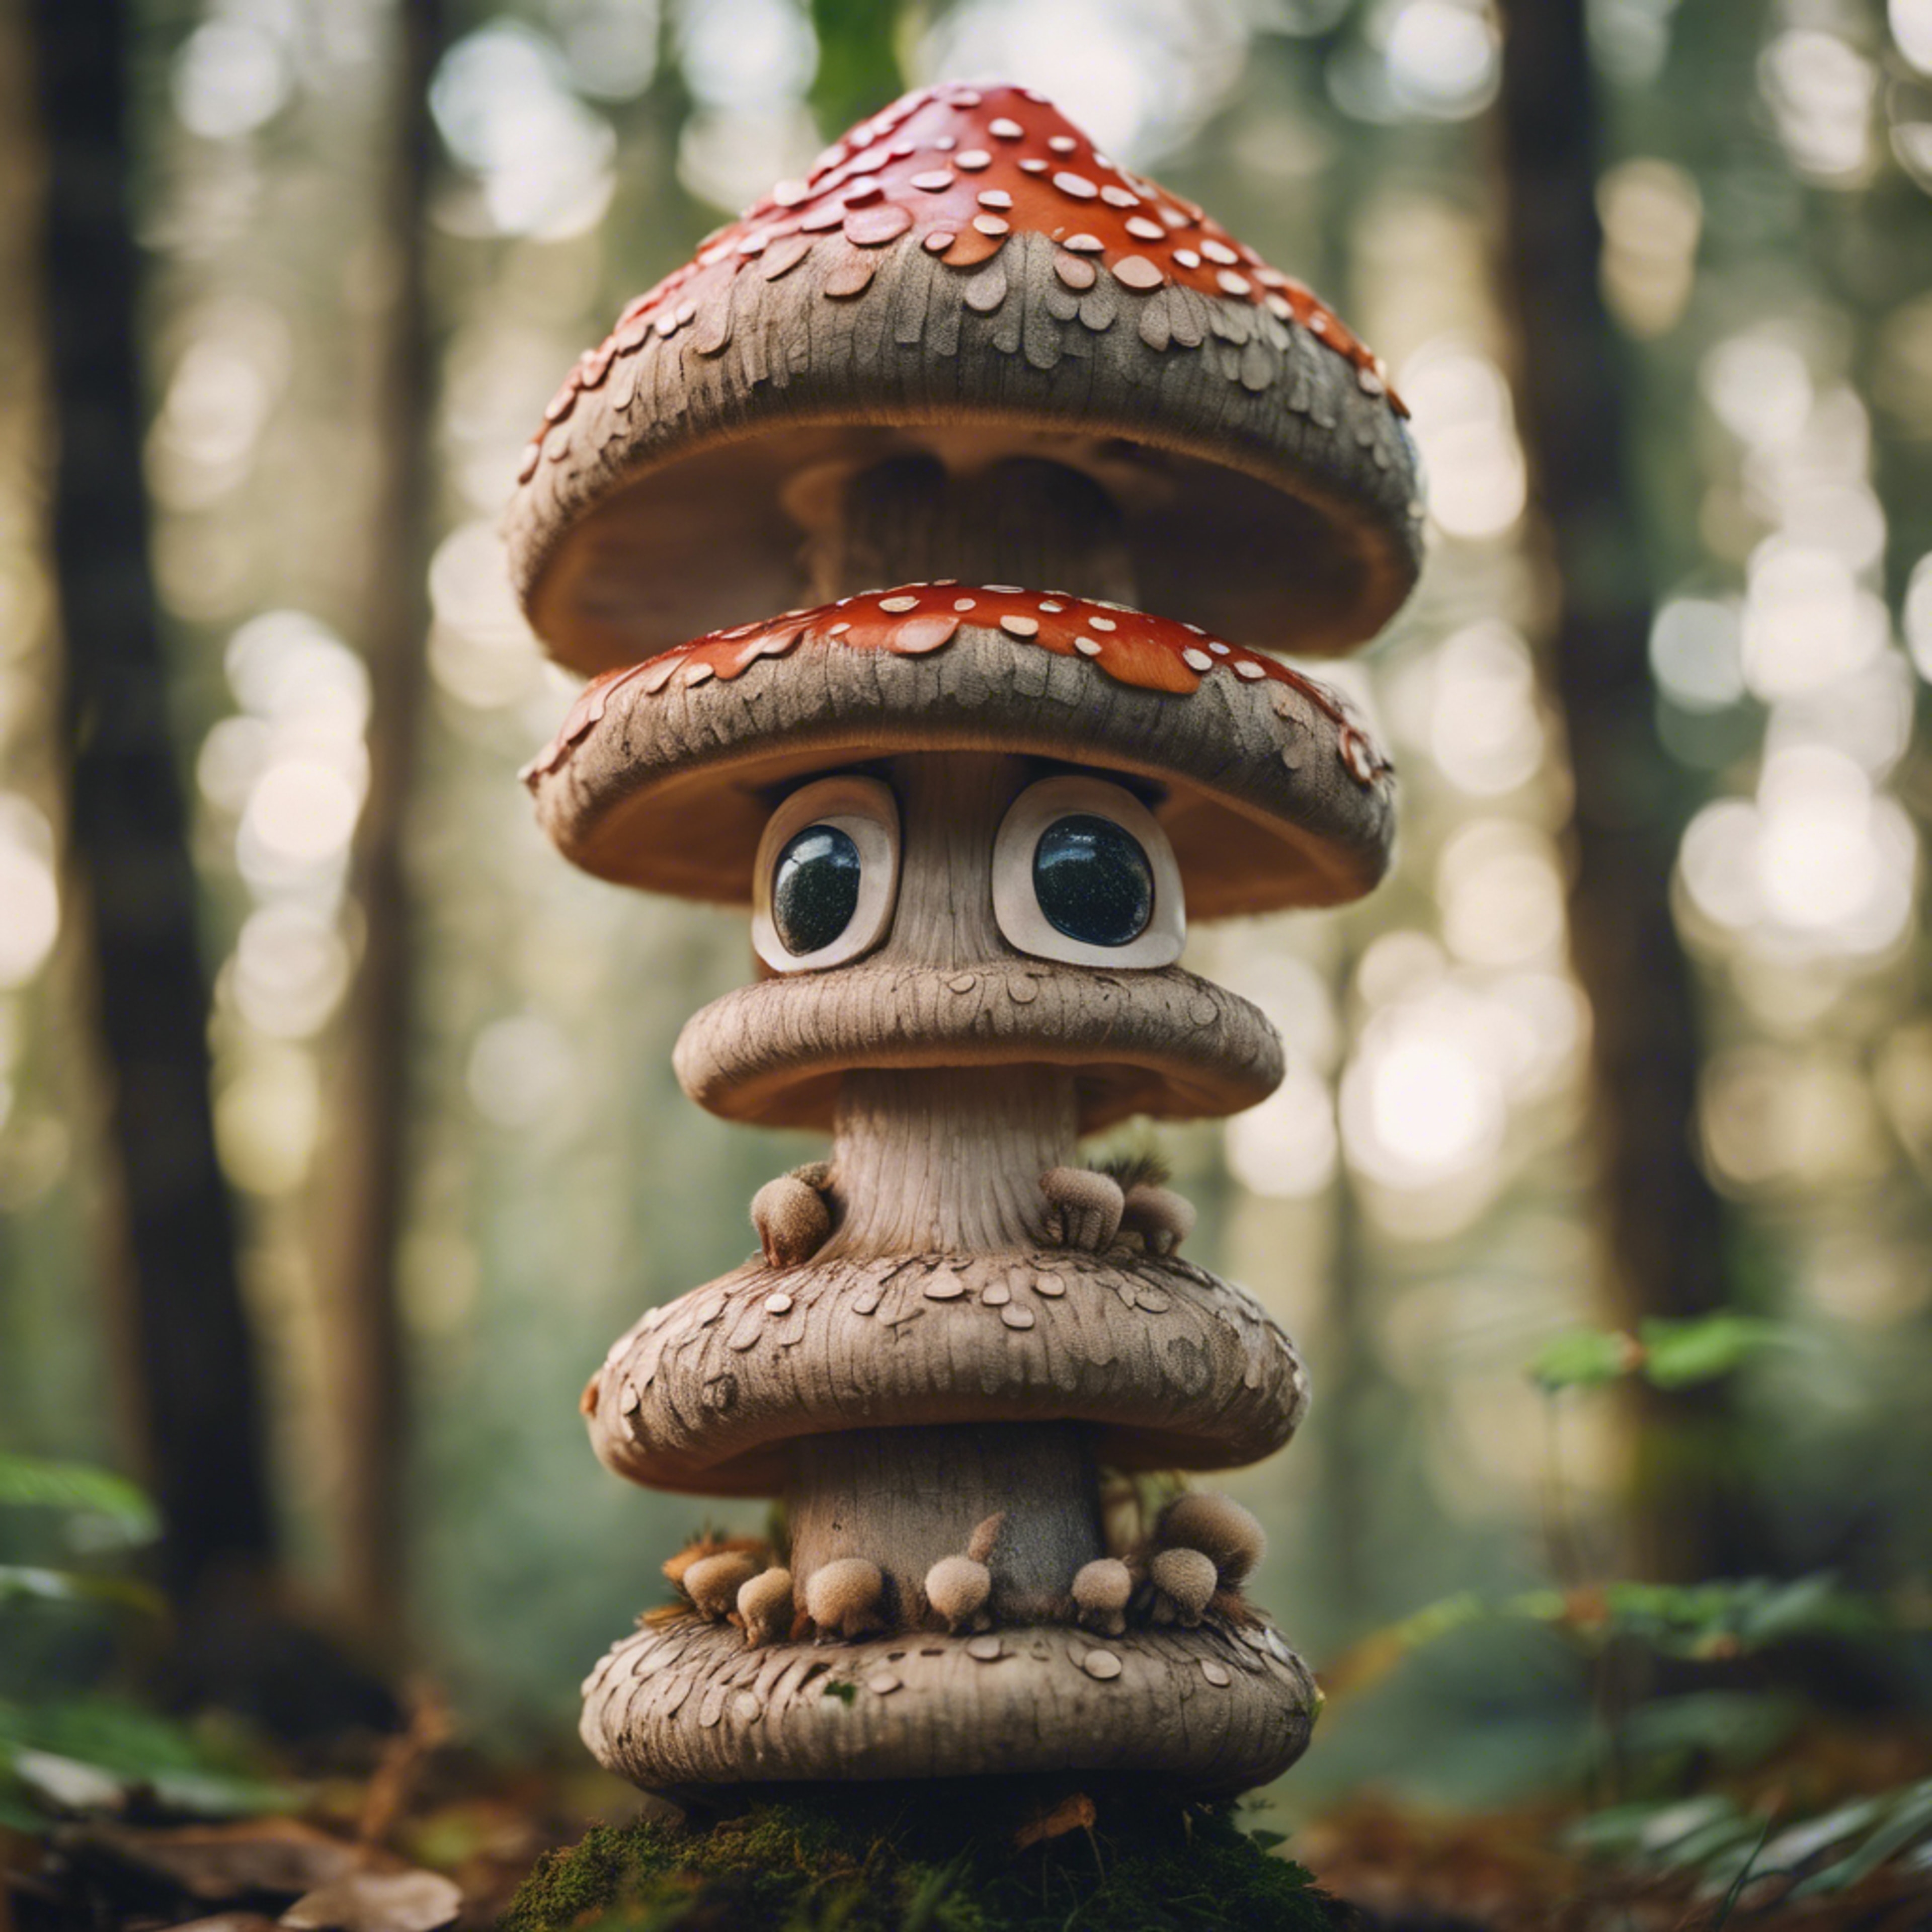 A couple of cute Mushrooms playfully stacking up to form a totem pole in a whimsical forest. Wallpaper[433a45e1c3f24476b32f]